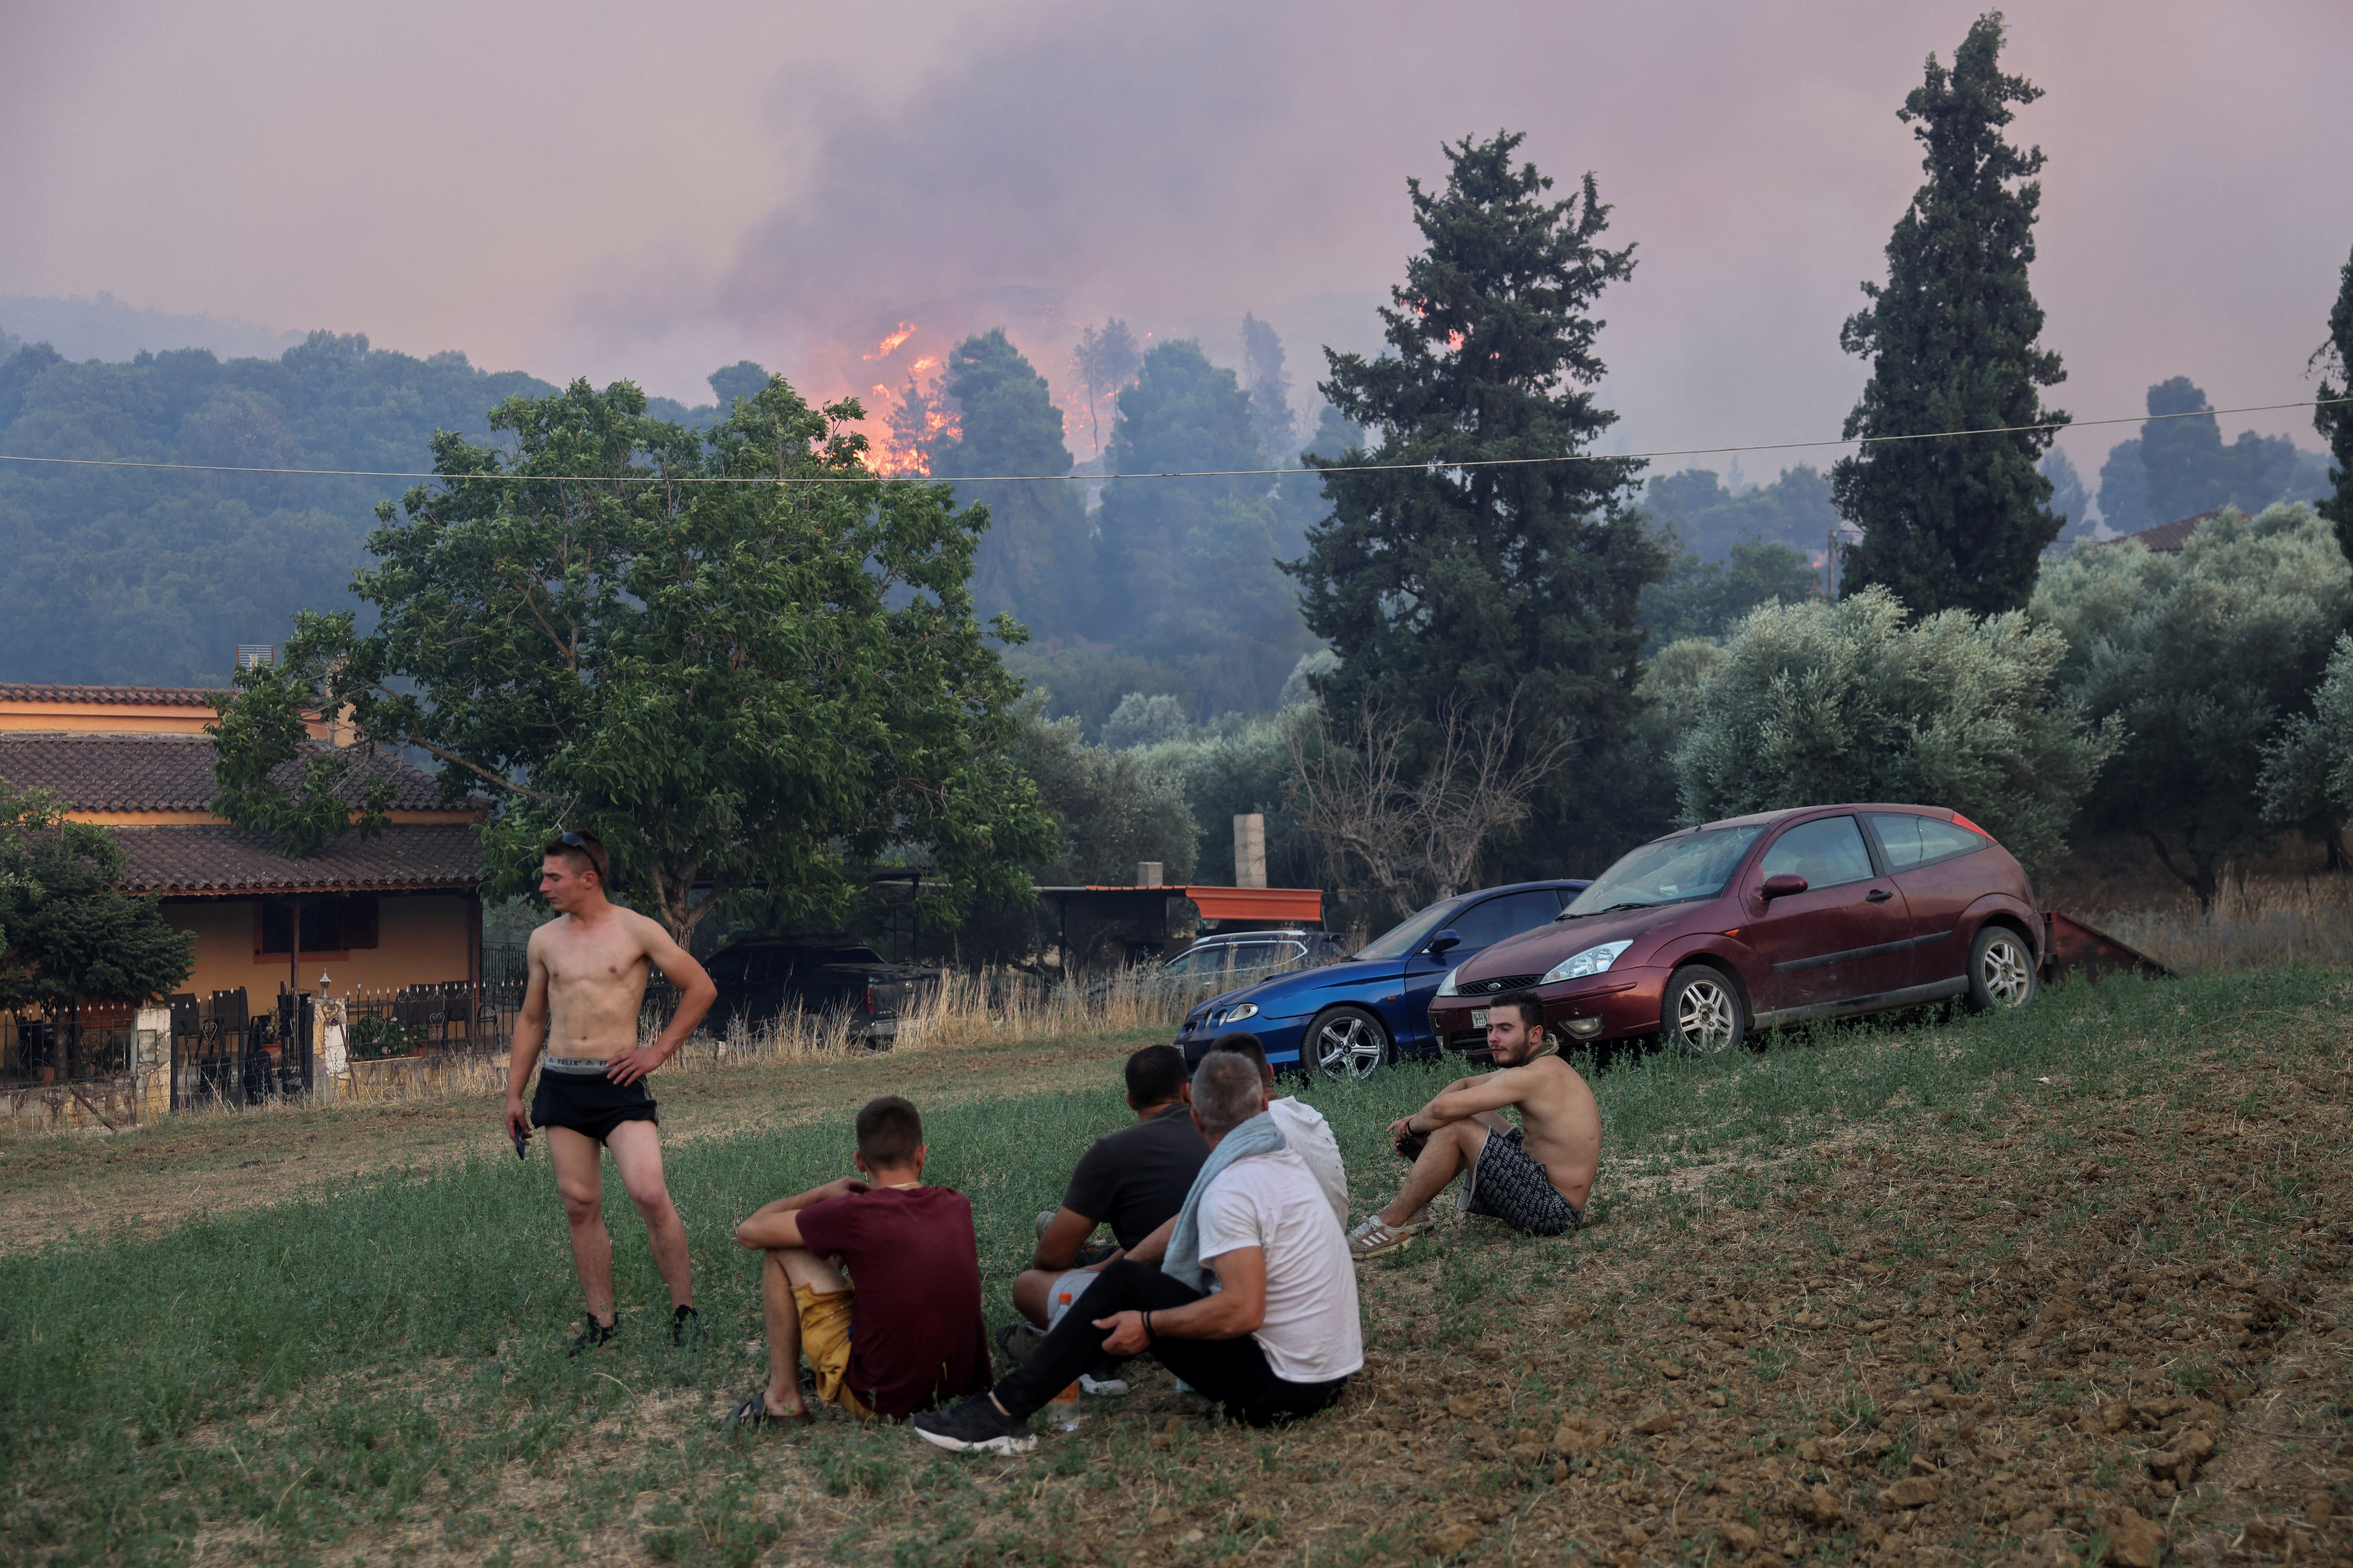 Local residents look on as another wildfire burns in the village of Kalfas in southern Greece on Saturday